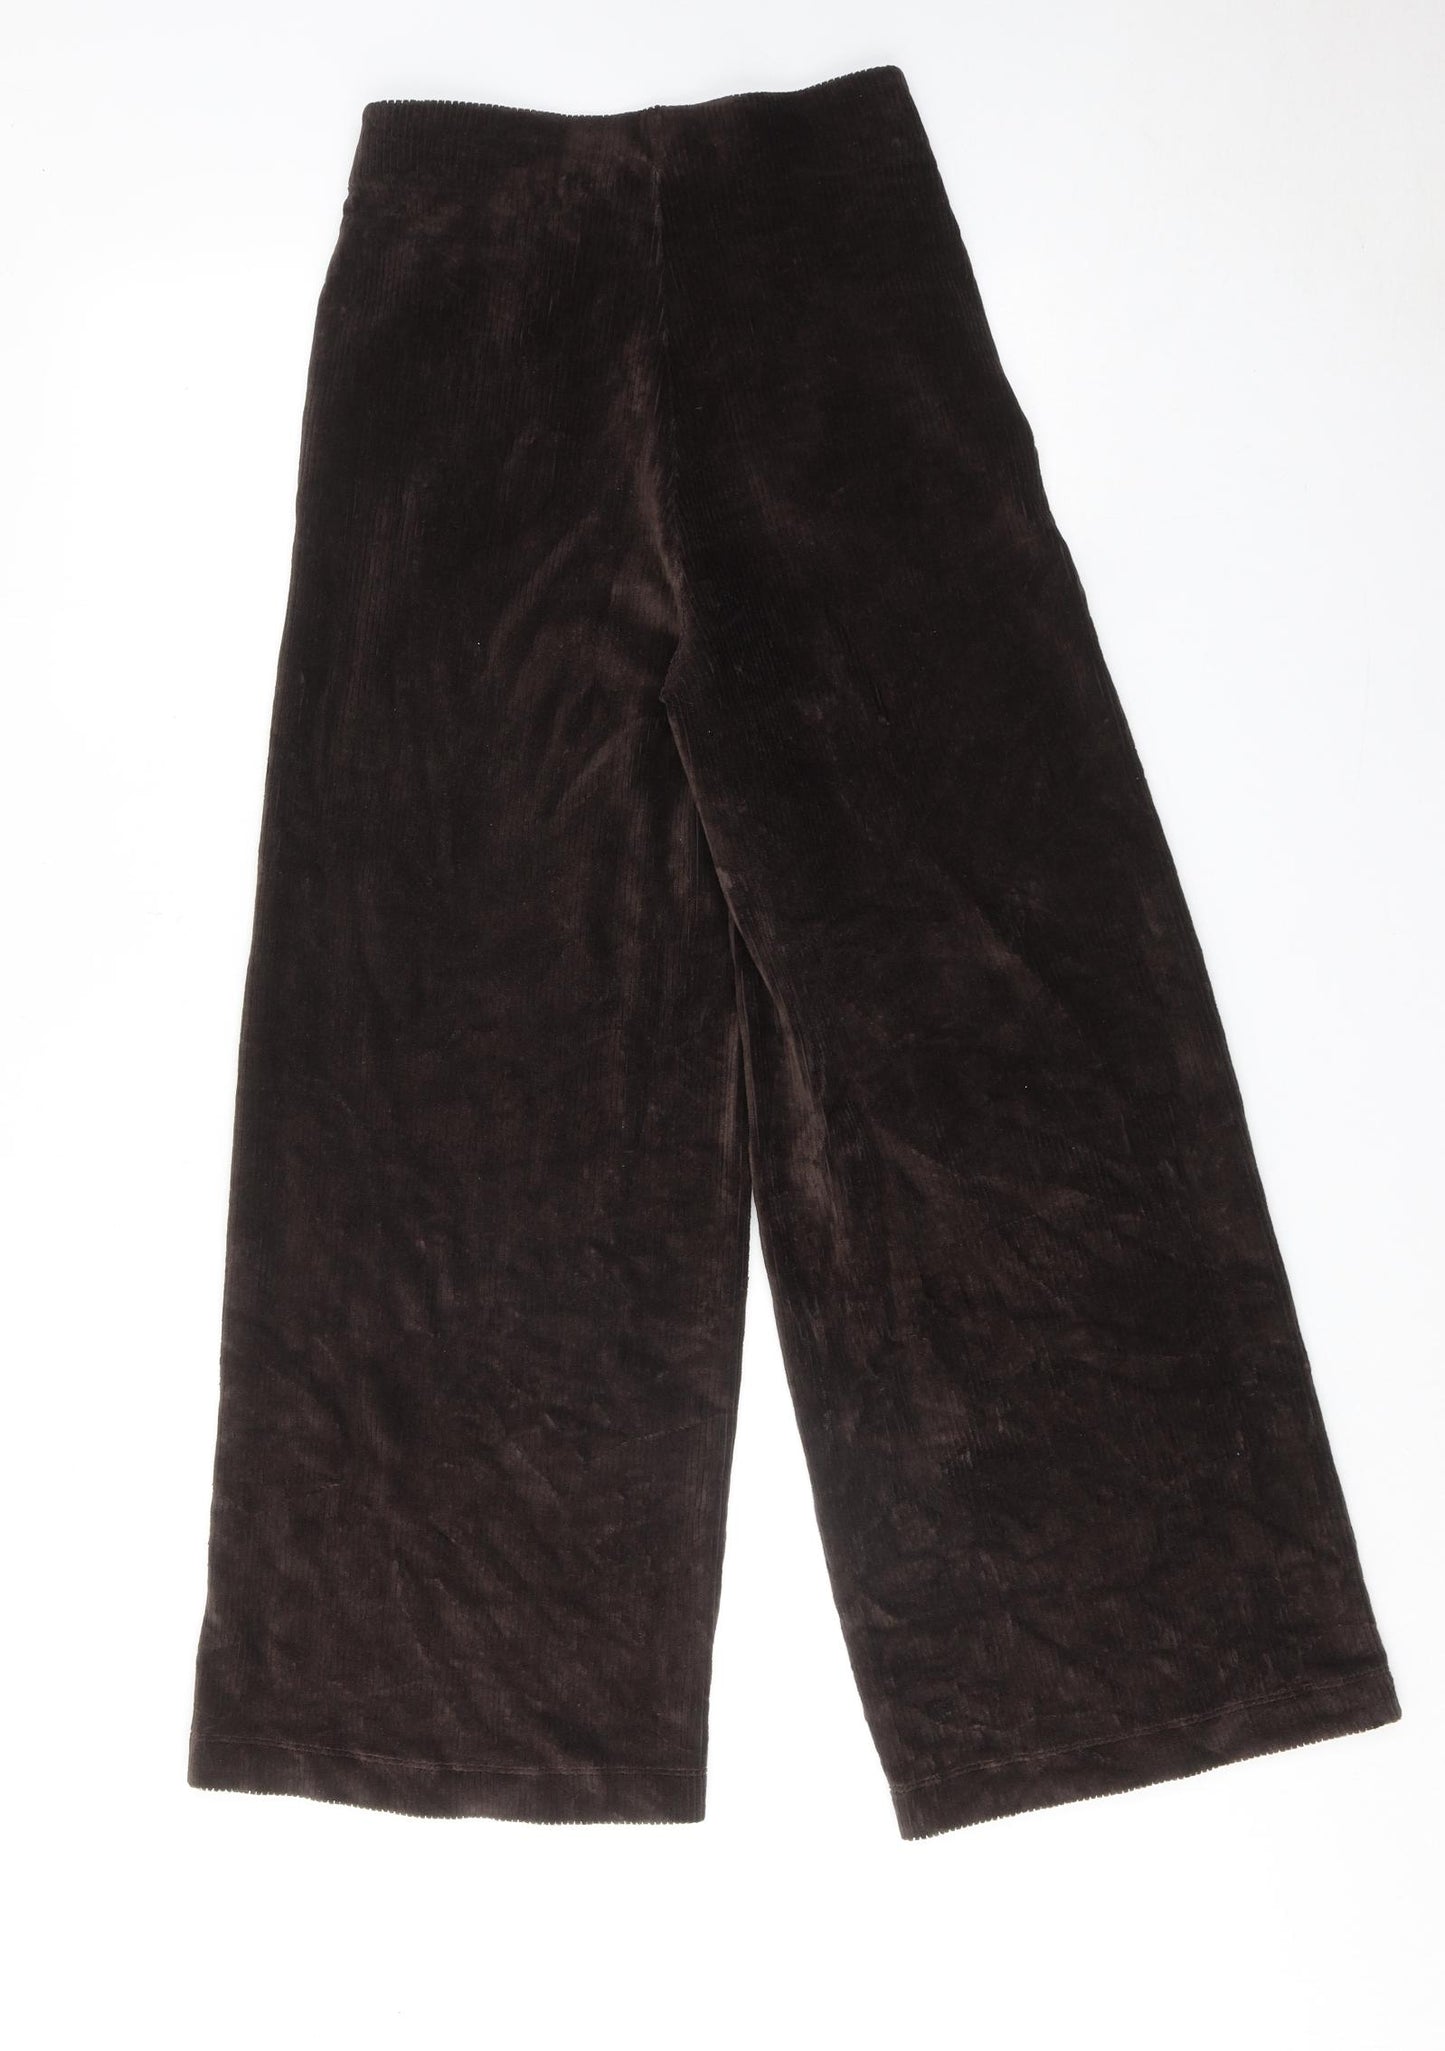 Marks and Spencer Womens Brown Cotton Trousers Size 8 Regular